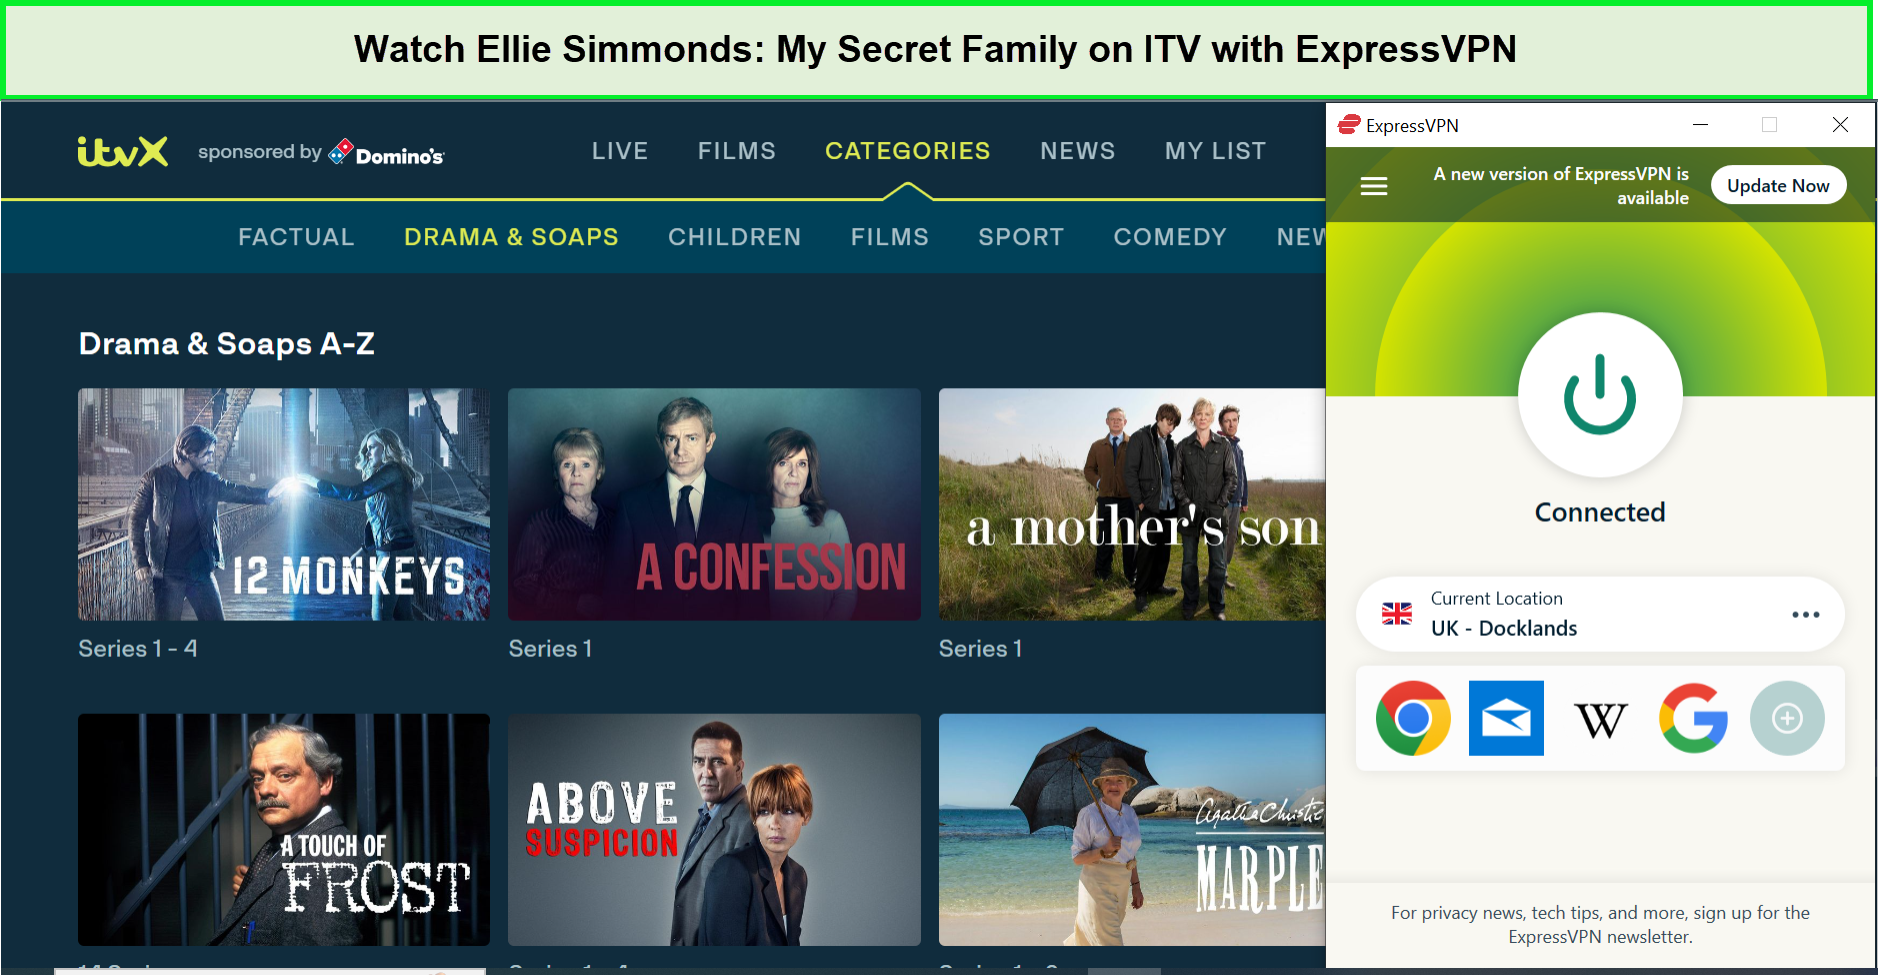 Watch-Ellie-Simmonds-My-Secret-Family-in-Germany-on-ITV-with-ExpressVPN